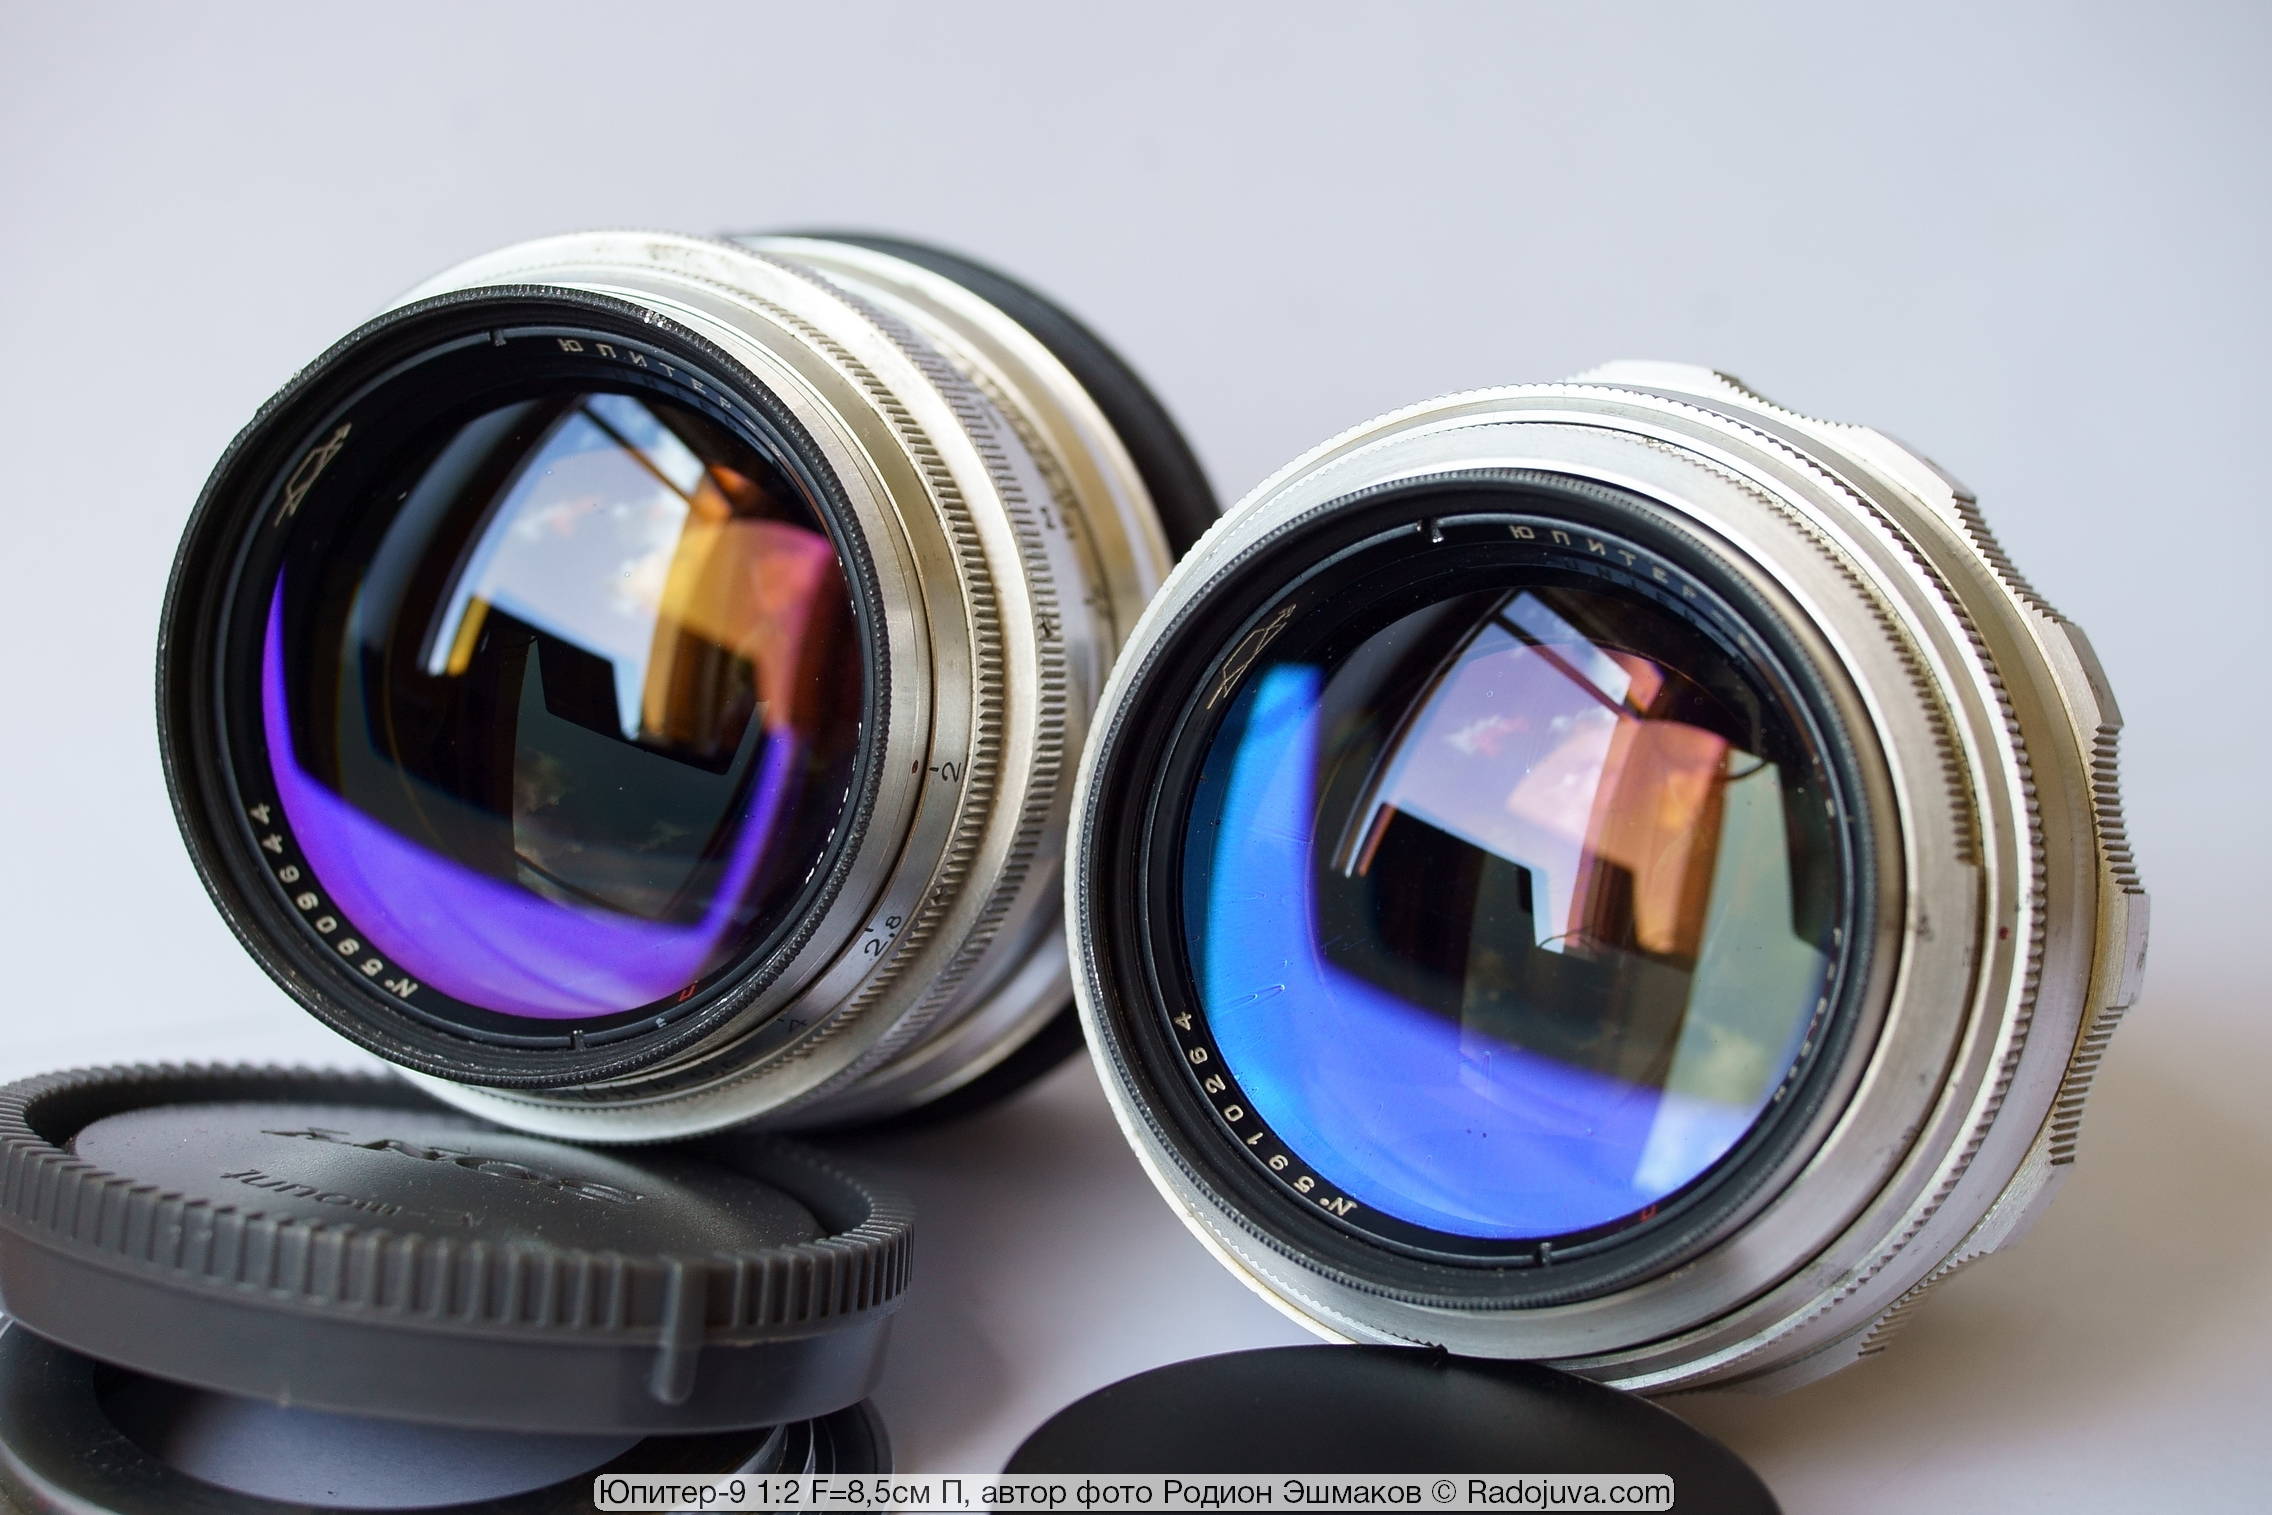 Even lenses of the same year of release differ in shades of coating.